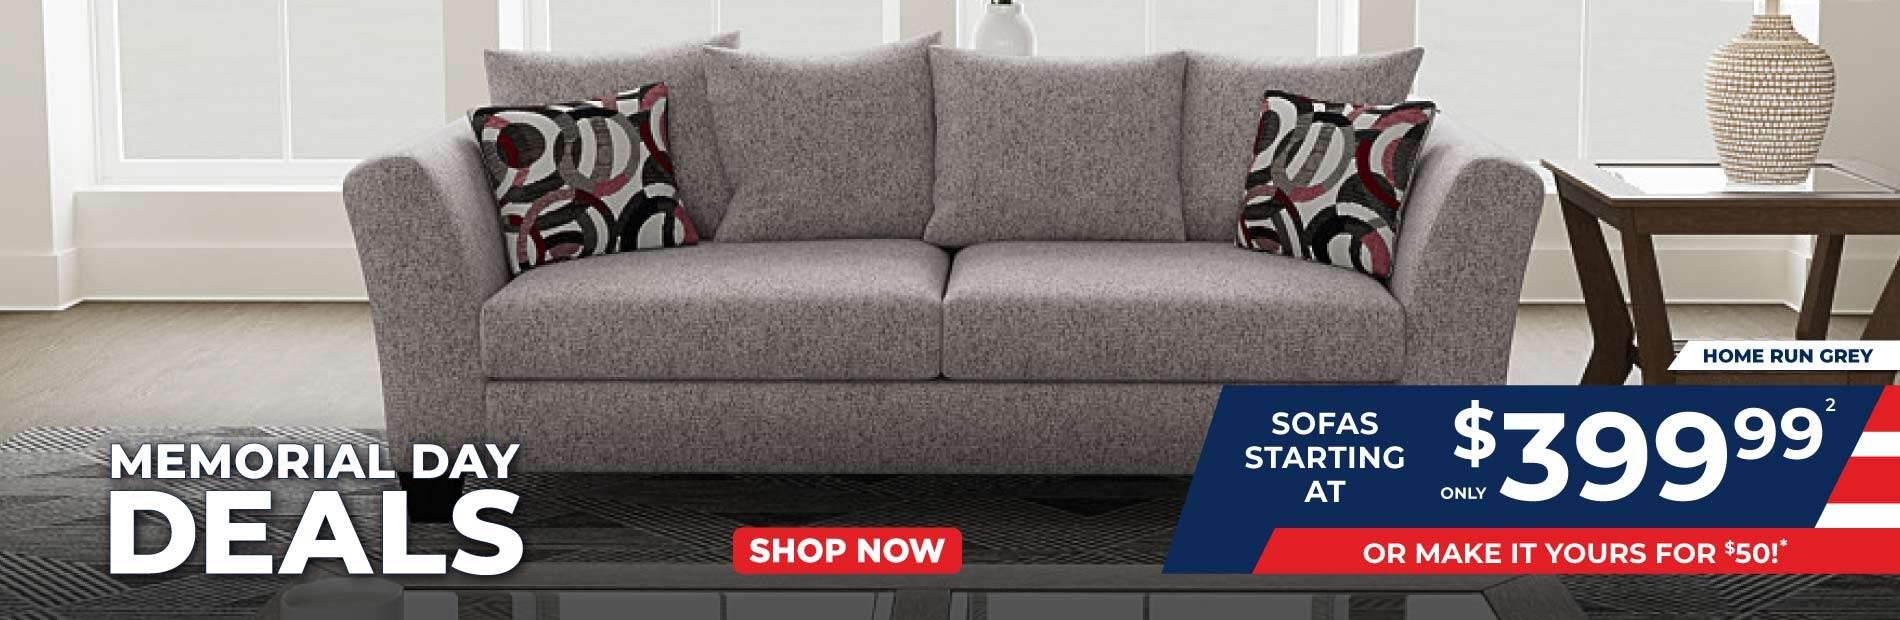 Memorial Day Deals. Home Run Grey. Sofas starting at 399.99. Make it yours for $50. Shop now.